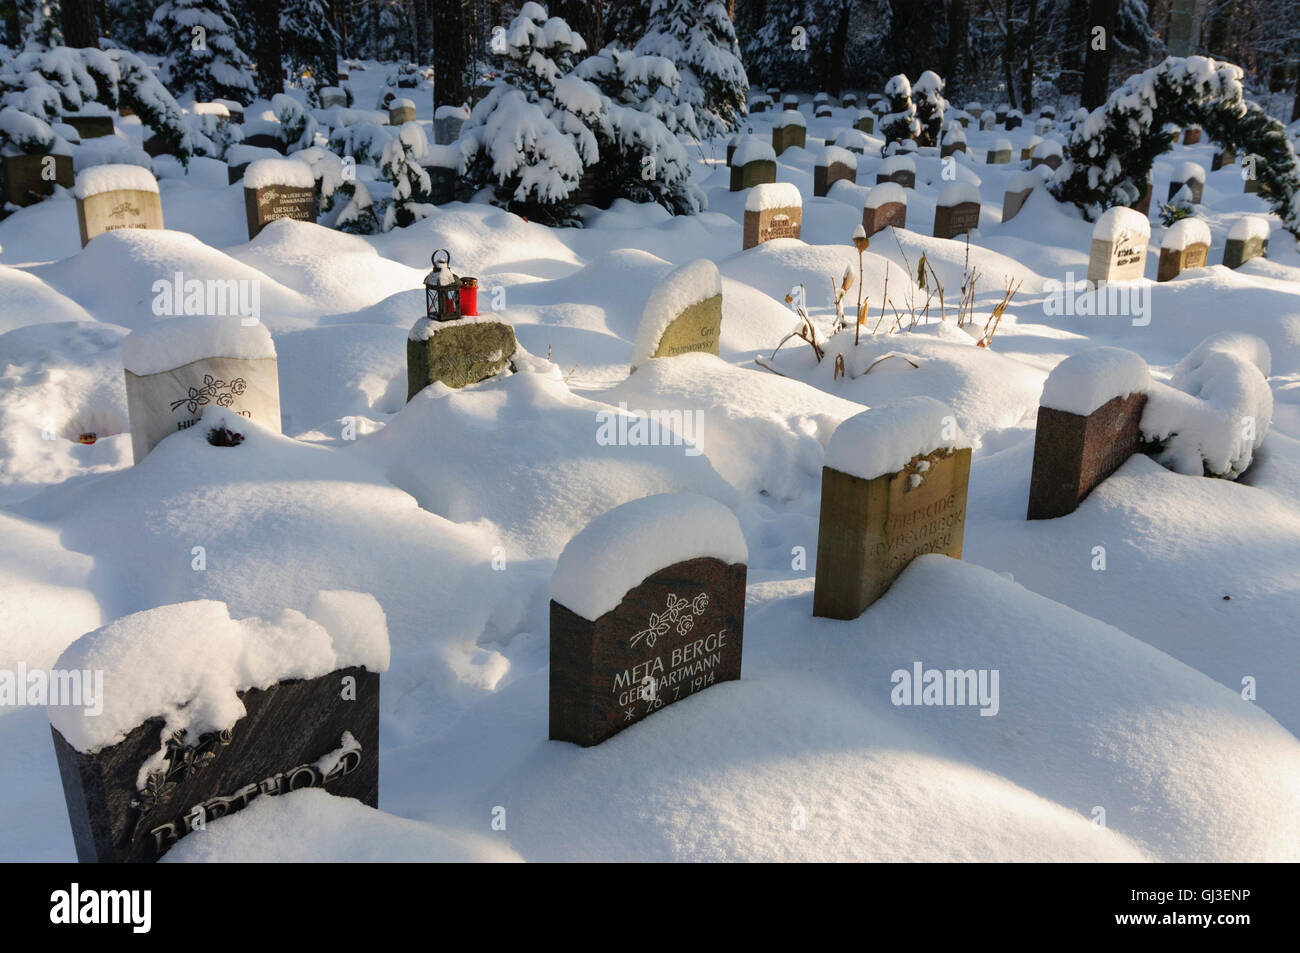 Dresden: Tombs grave stones at the cemetery deep in snow, Germany, Sachsen, Saxony, Stock Photo